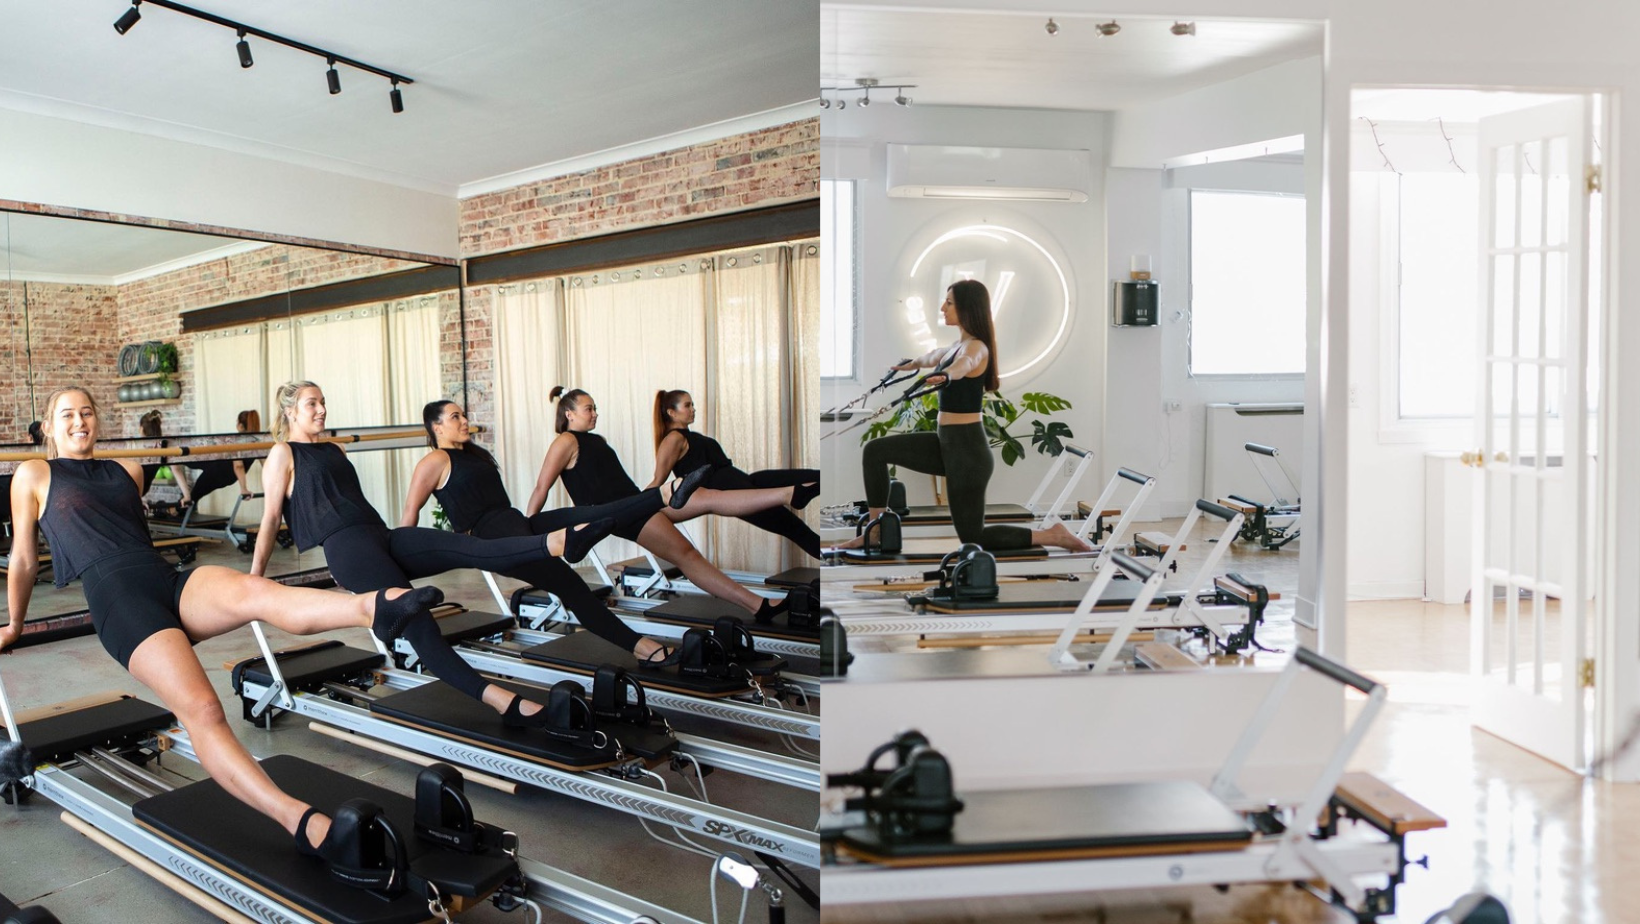 Equilibre Studio: Pilates, Yoga, Barre Fitness, Essentric in Montreal